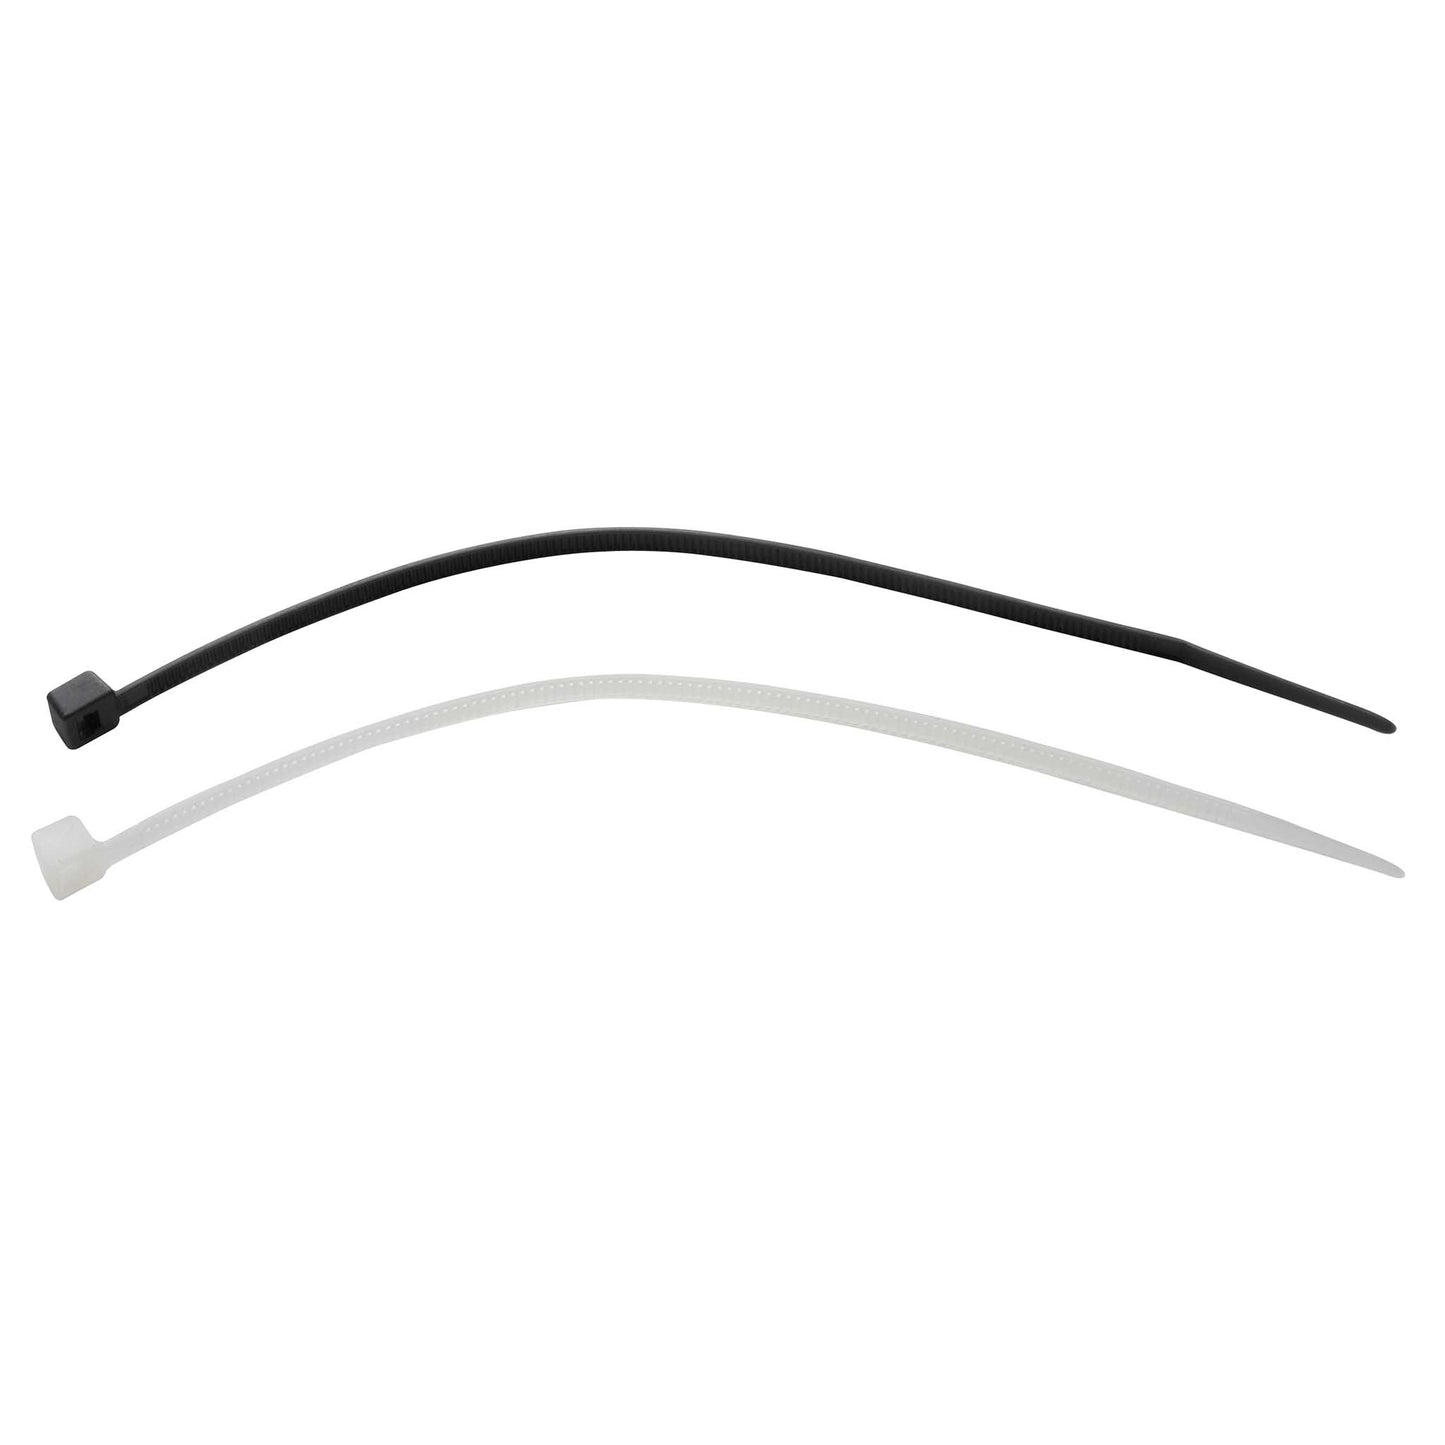 Cable ties 290 x 4.8 mm - black